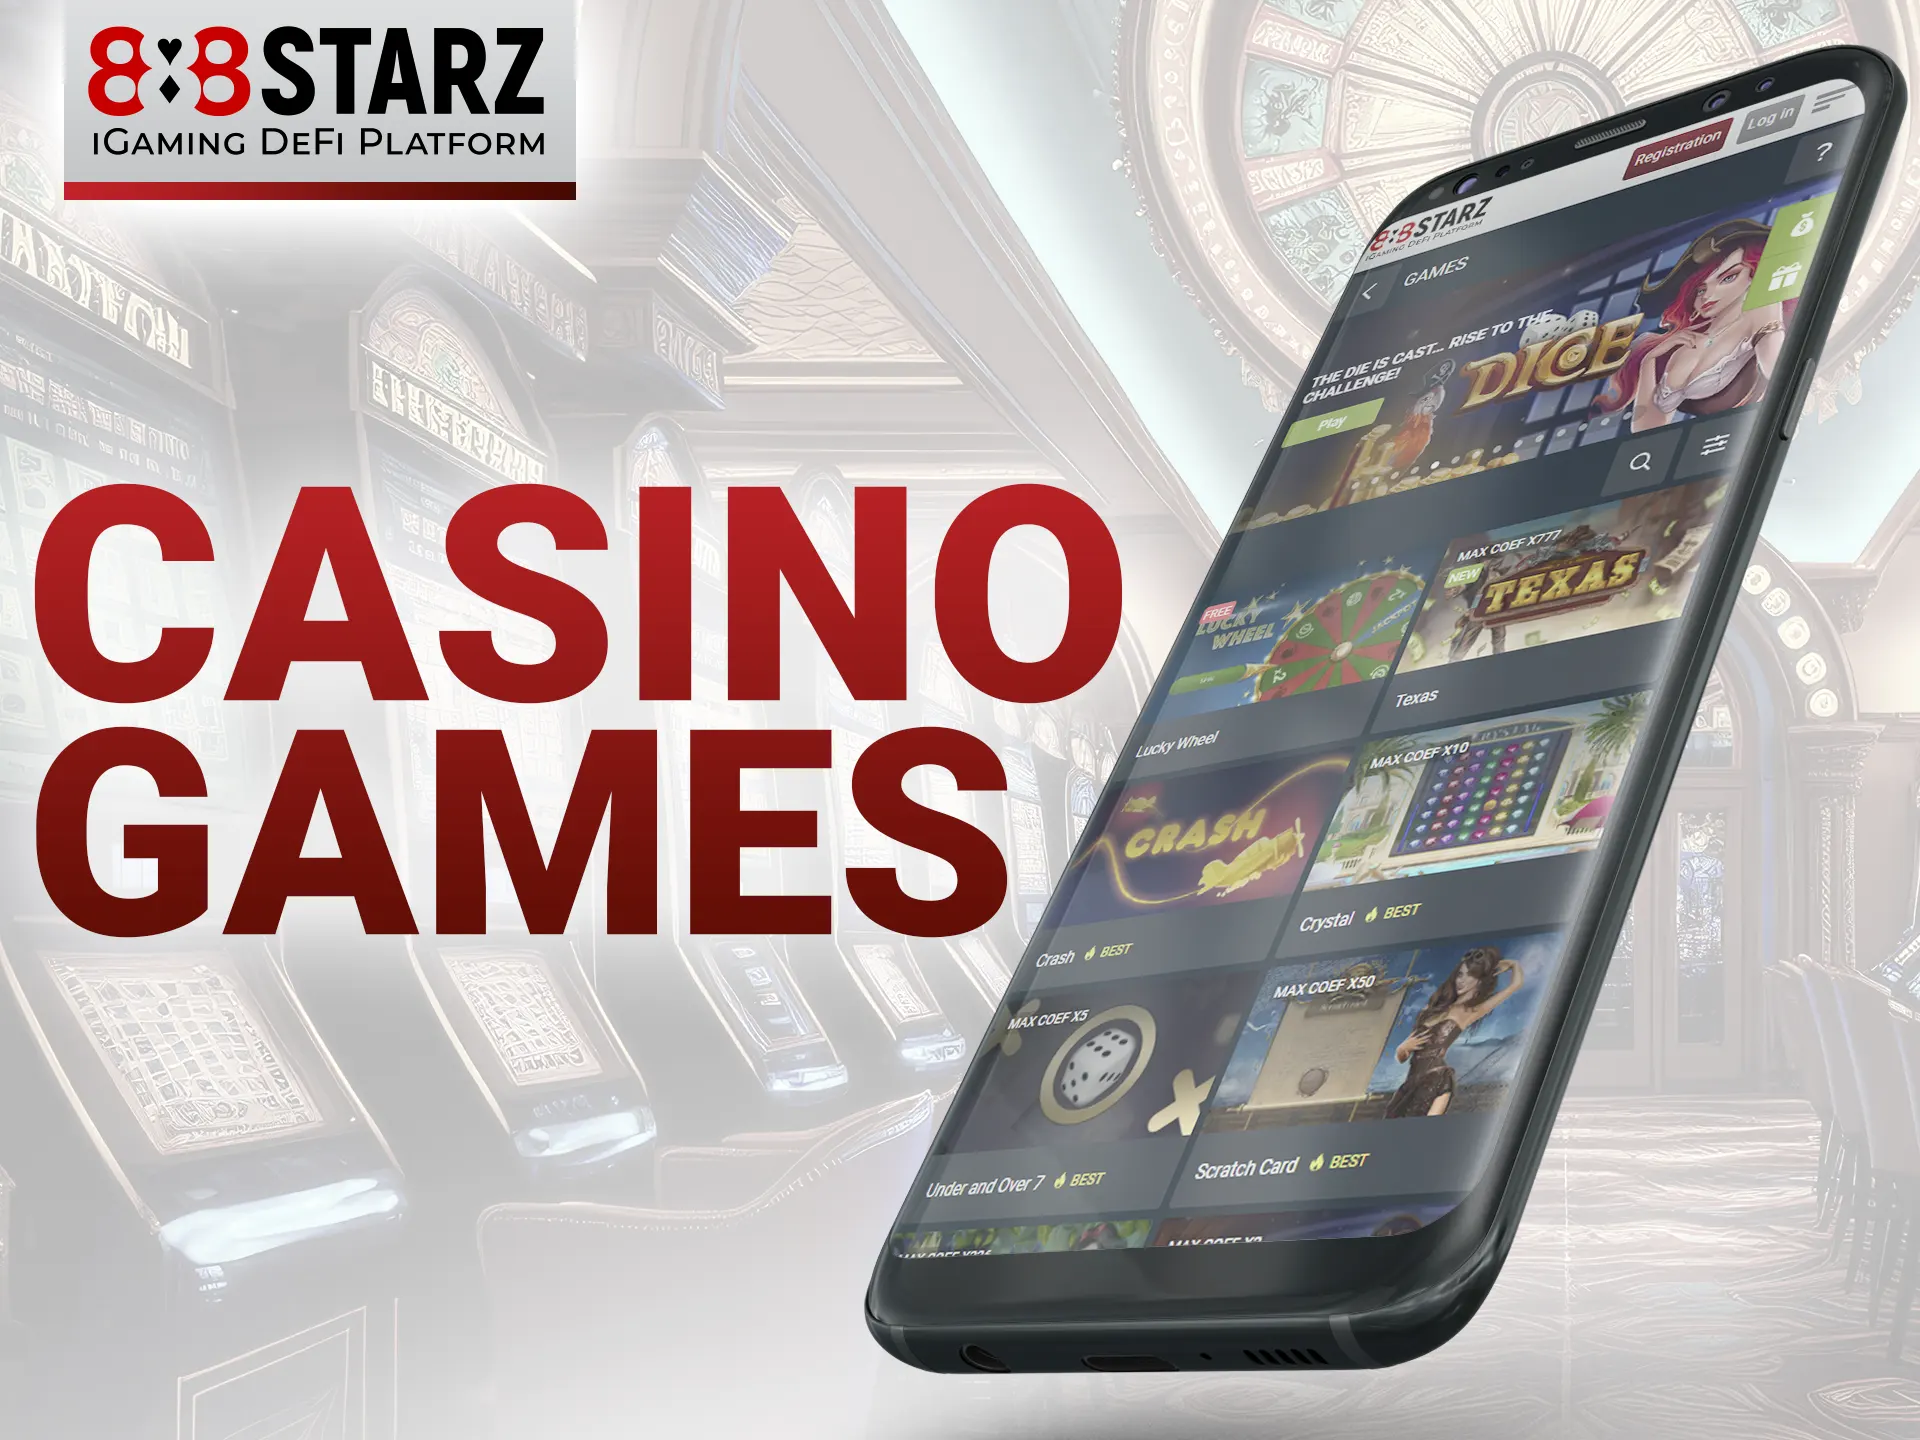 Play the most popular casino games at 888Starz.